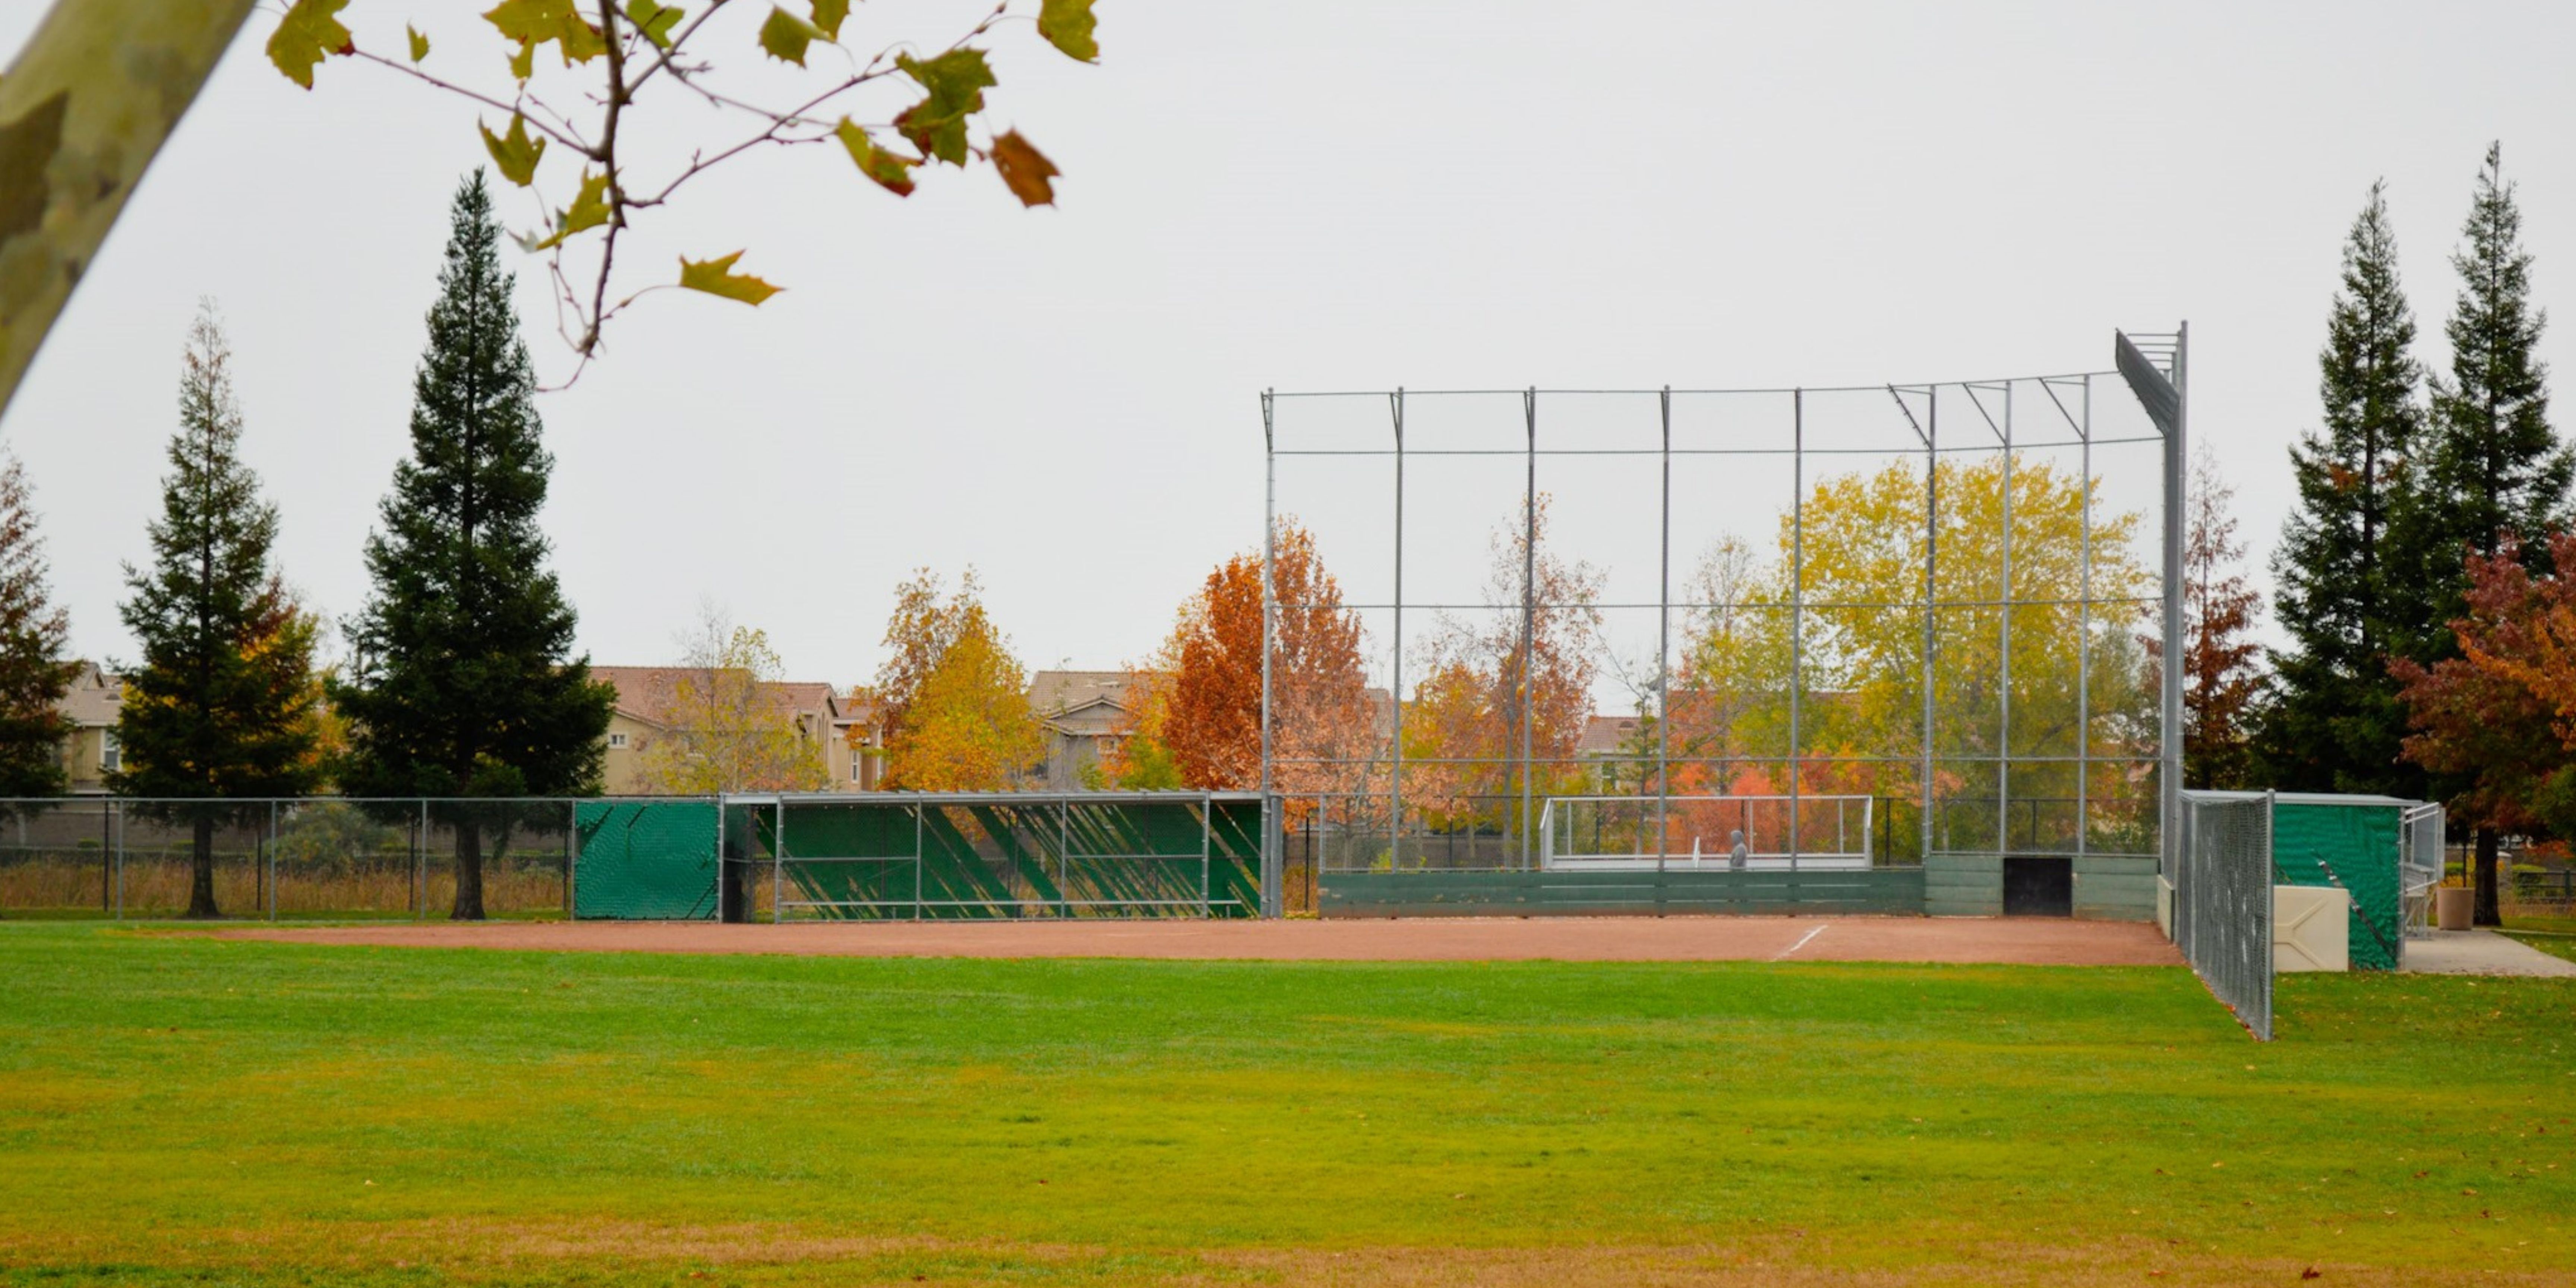 Green baseball field with trees changing colors in Autumn